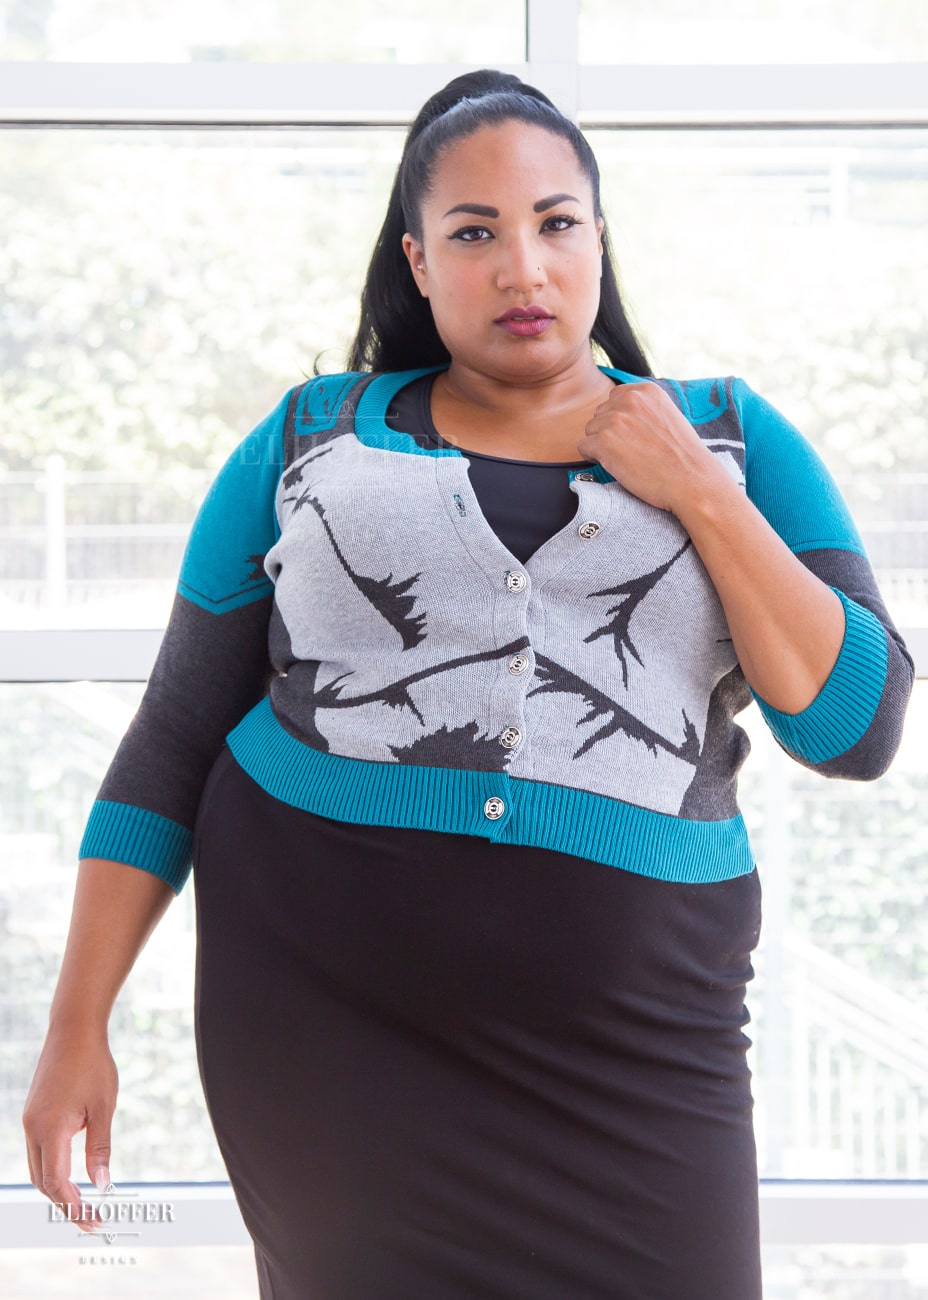 Tas, a medium dark skinned size 2xl model with long dark hair in a pony tail, is wearing a cropped button up knit cardigan with 3/4 sleeves. The cardigan front is mainly a light grey with dark grey decorative lines that give the impression of battle damaged armor, with teal at the shoulders, and the bottom half of the sleeve and back of the cardigan are a dark grey. The neckine, bottom, and cuffs are all teal ribbing.